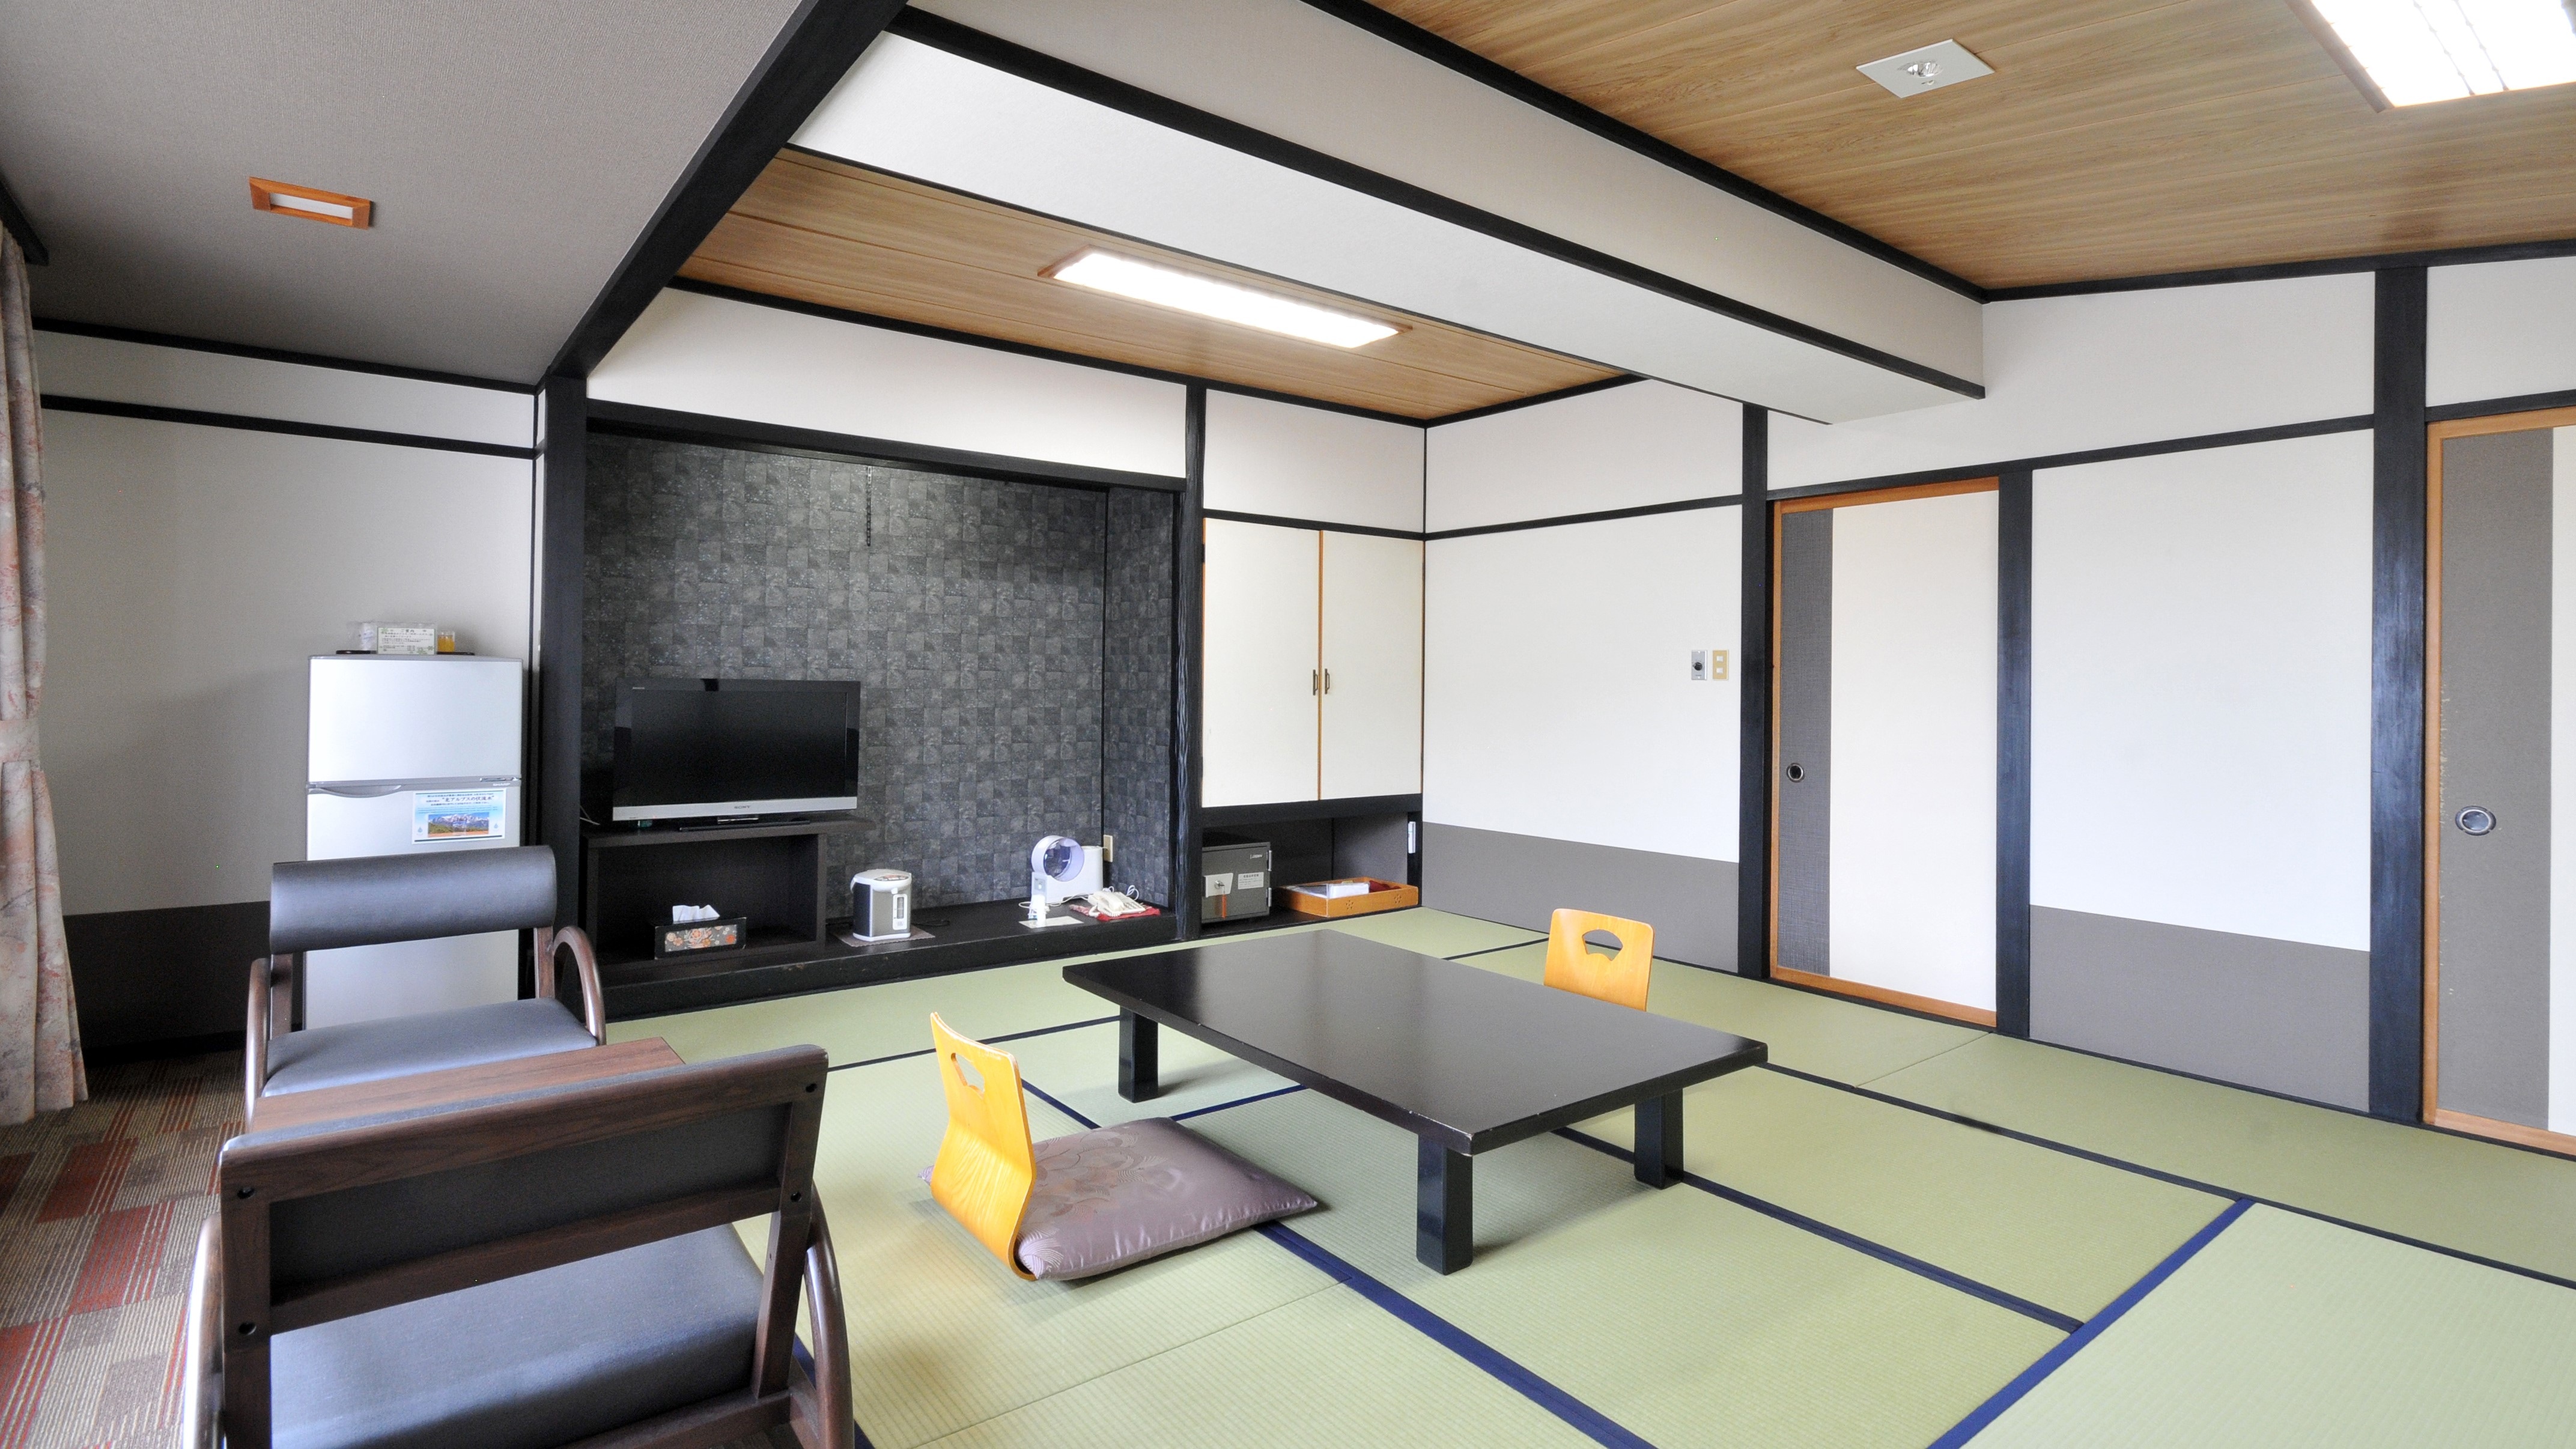 Japanese-style room 12 tatami mats * All rooms are non-smoking * Bath and toilet included